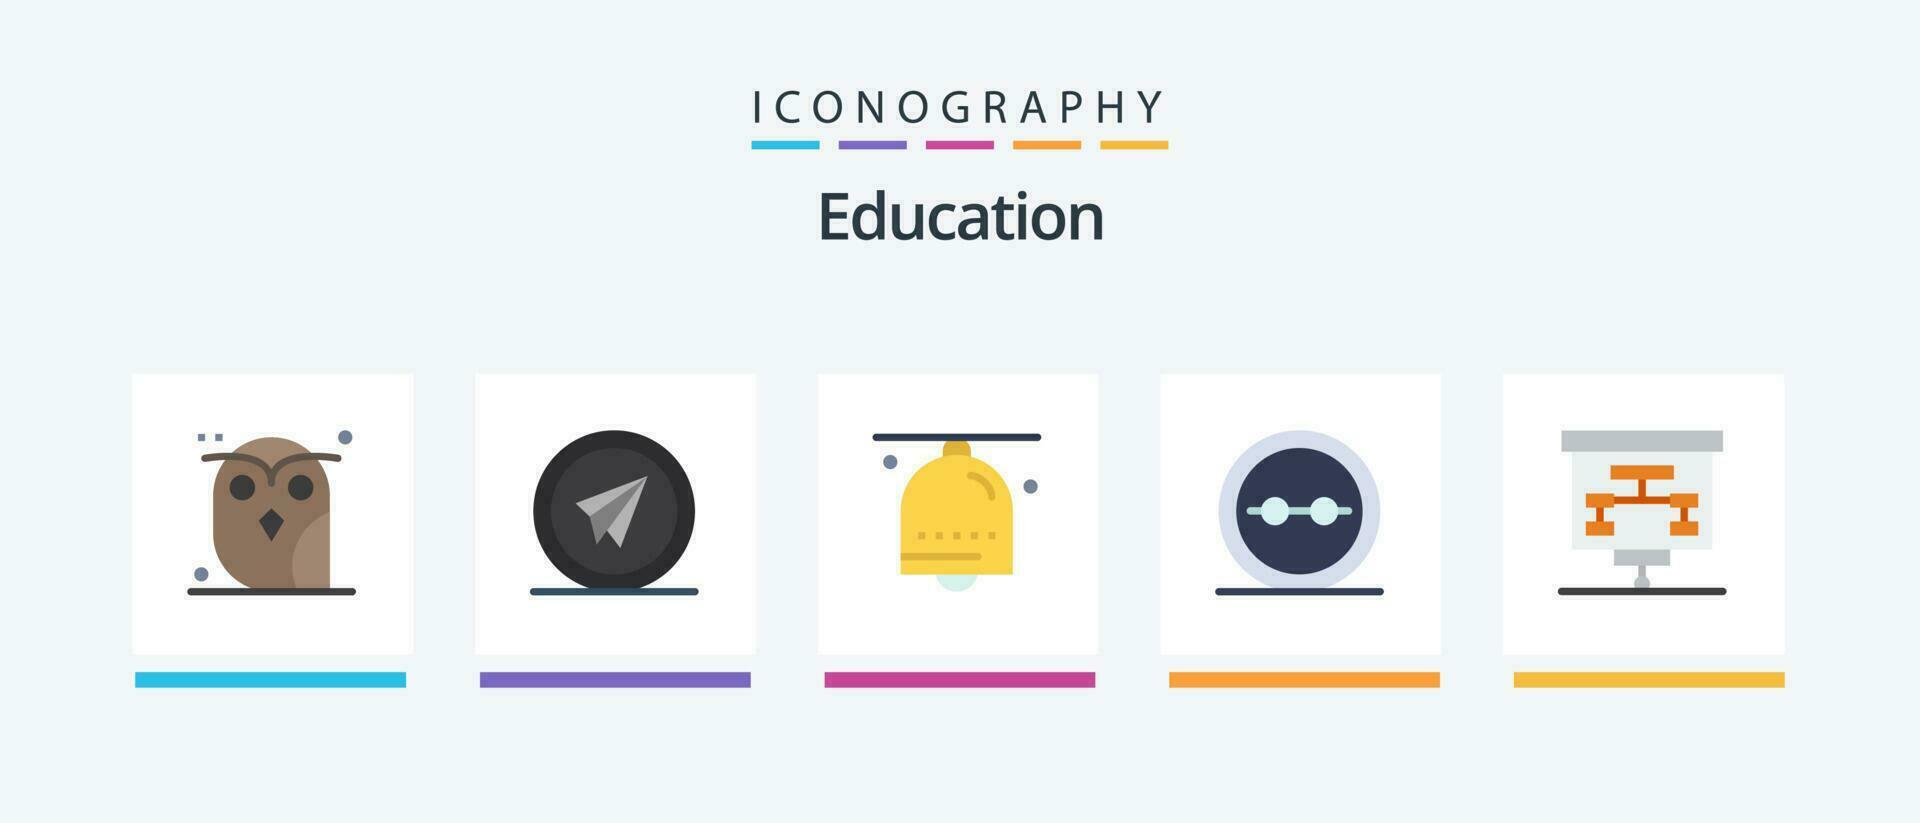 Education Flat 5 Icon Pack Including geek. eye glasses. paper. ring. hand bell. Creative Icons Design vector